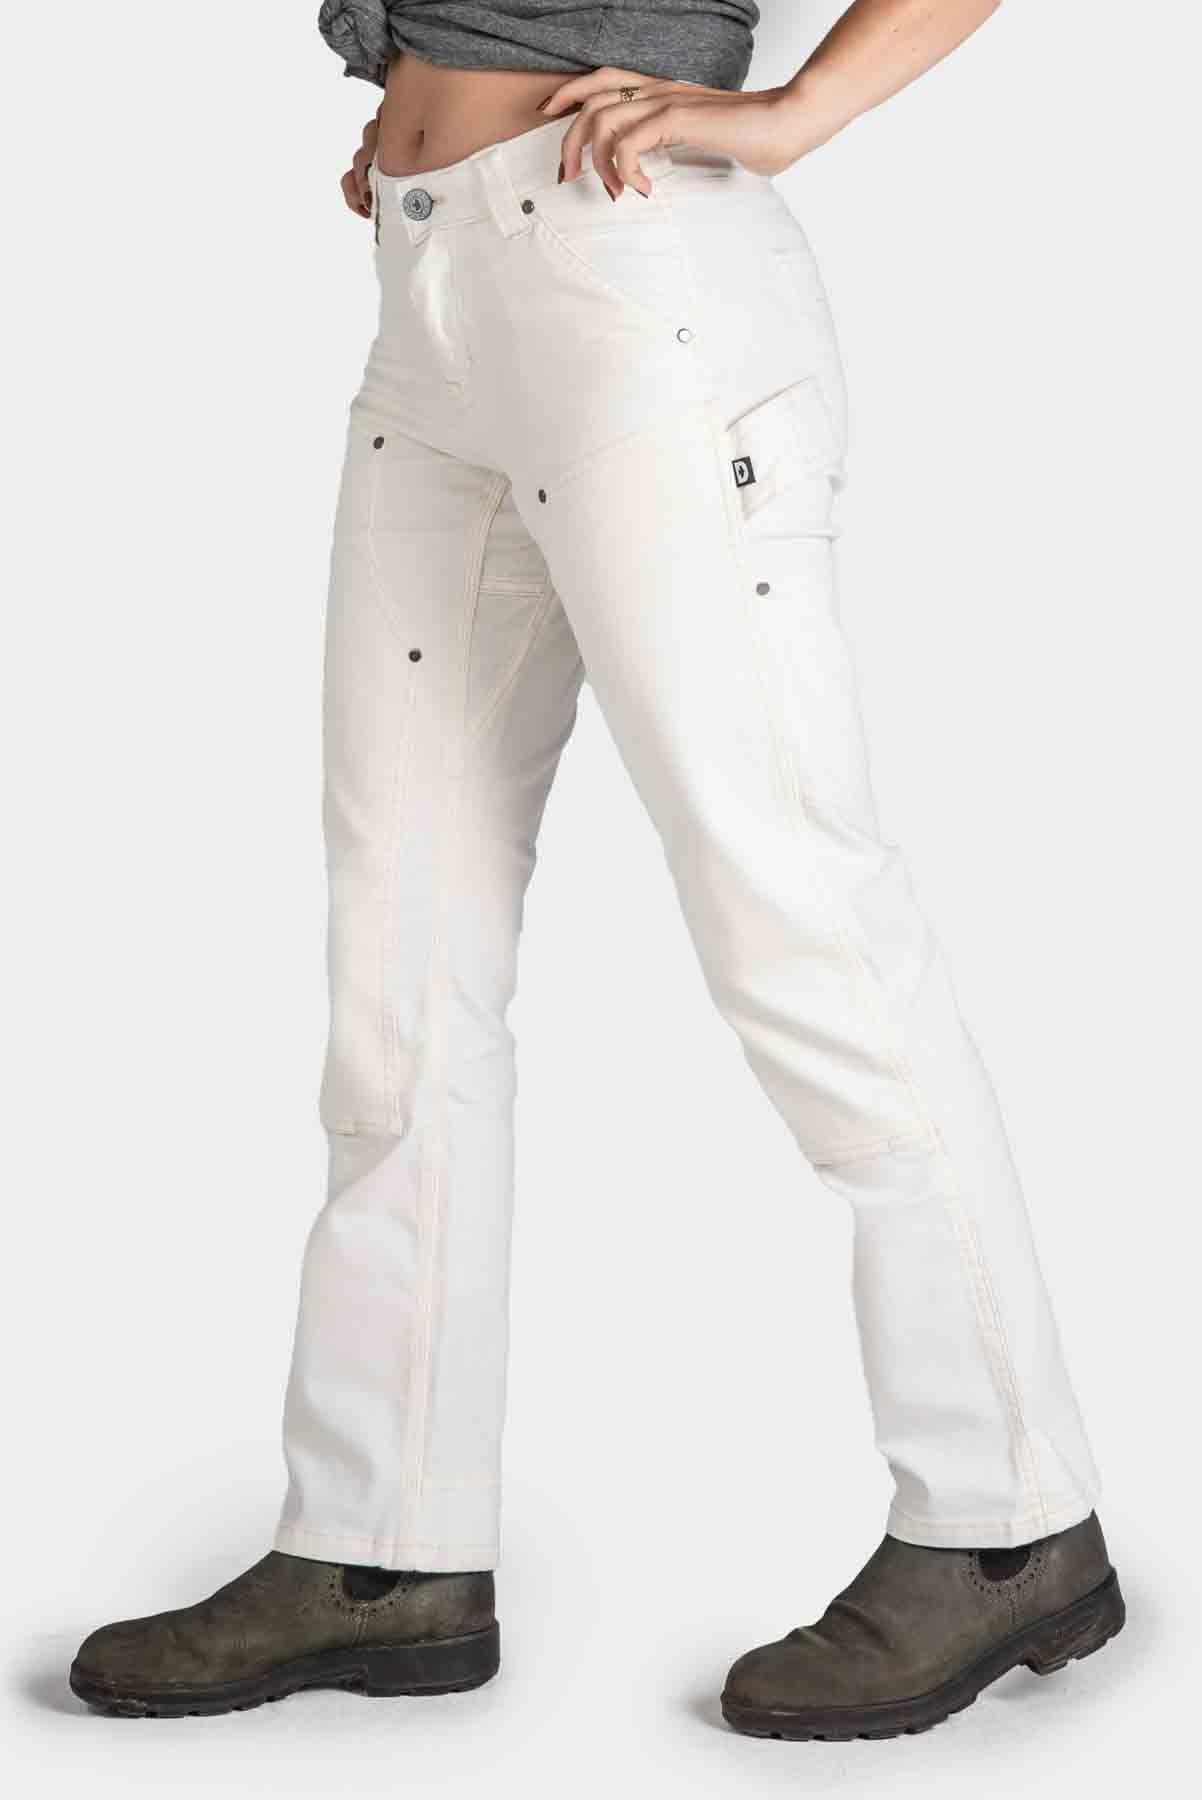 Anna Taskpant in Painter's White Canvas Work Pants Dovetail Workwear